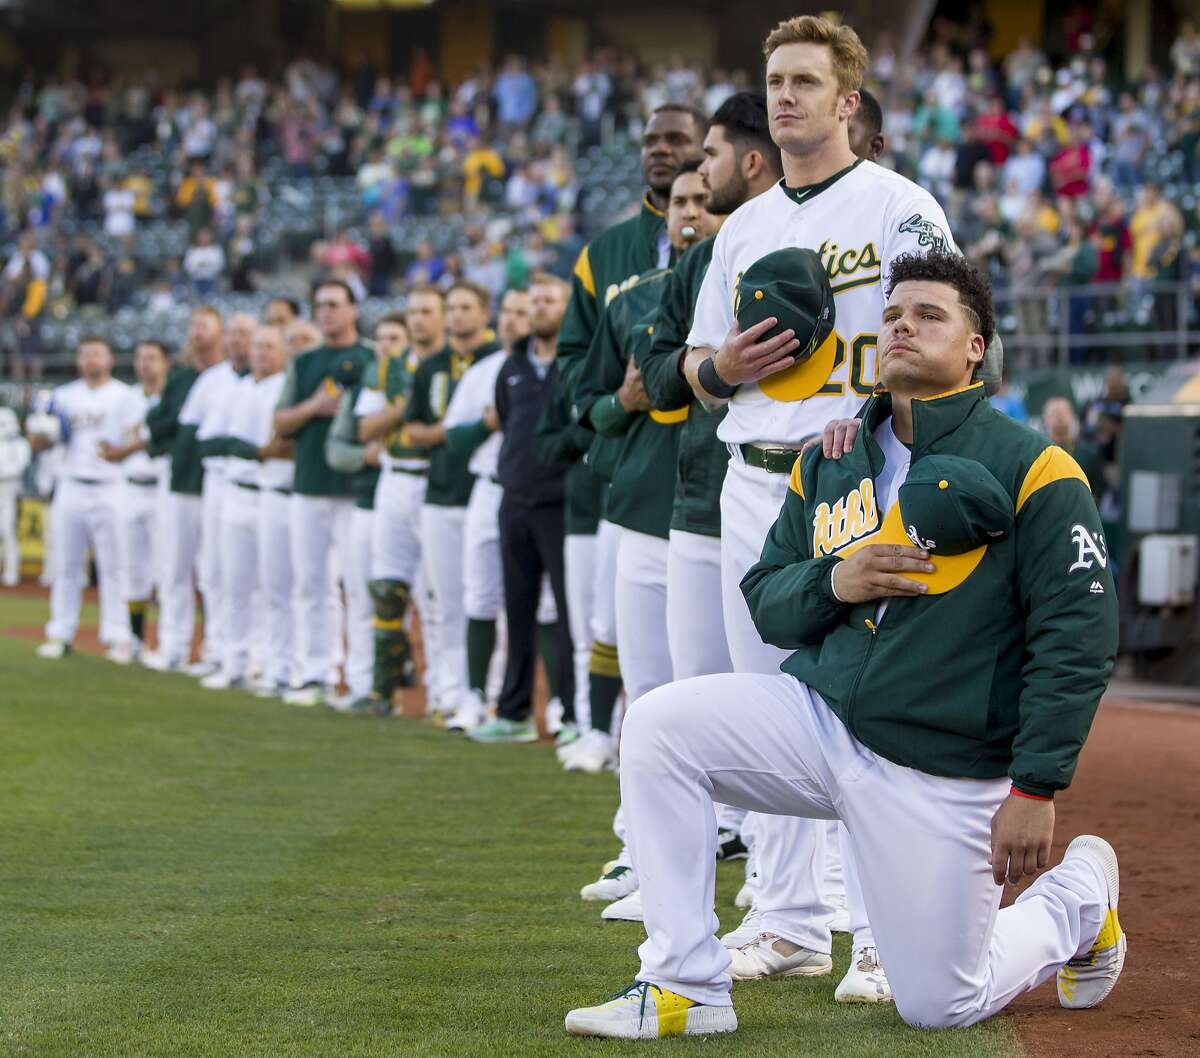 From right: Oakland Athletics catcher Bruce Maxwell (13) takes a knee as Oakland Athletics left fielder Mark Canha (20) puts his hand on his shoulder during the playing of the national anthem before an MLB baseball game between the Oakland Athletics and Texas Rangers at the Oakland Coliseum on Saturday, Sept. 23, 2017, in Oakland, Calif.